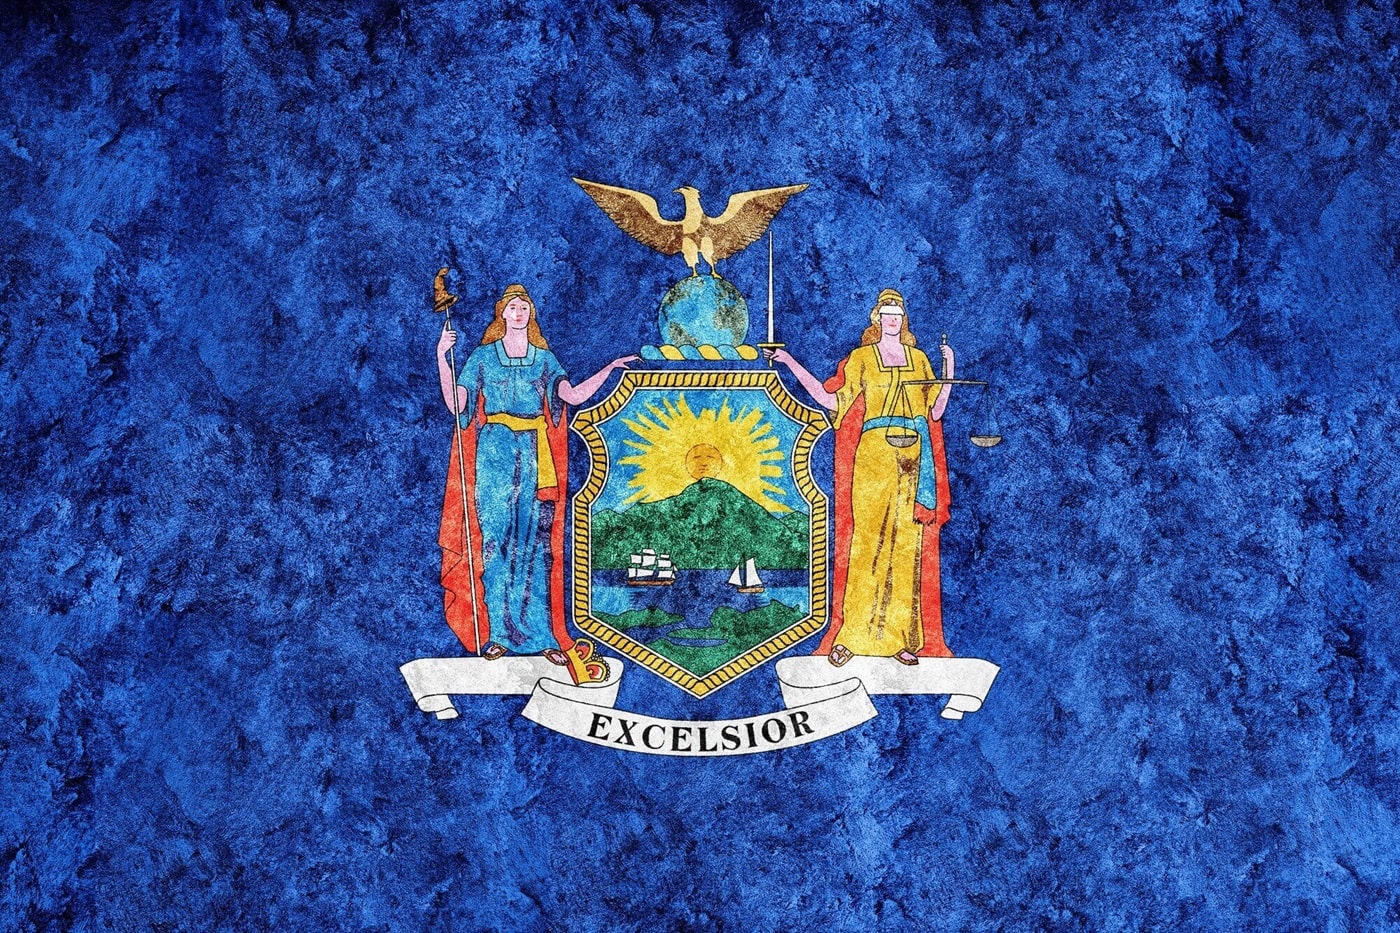 An image of the New York State flag, in which only residents can file for divorce.